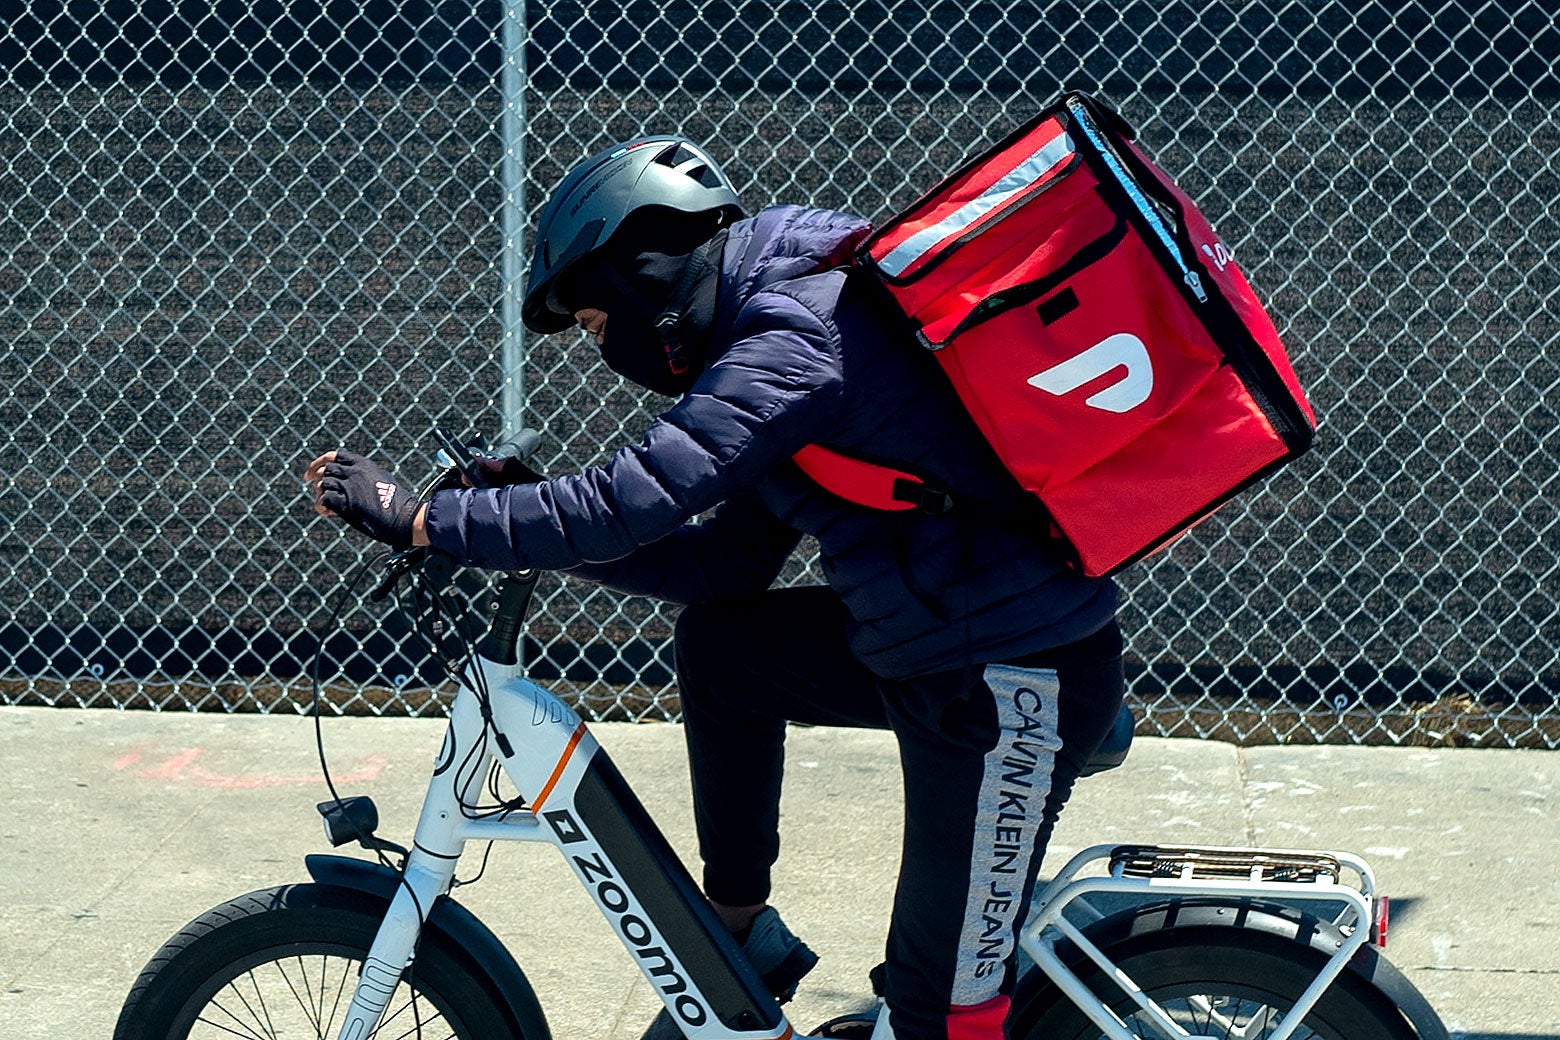 A DoorDash delivery person on a bike with a large delivery bag on their back.